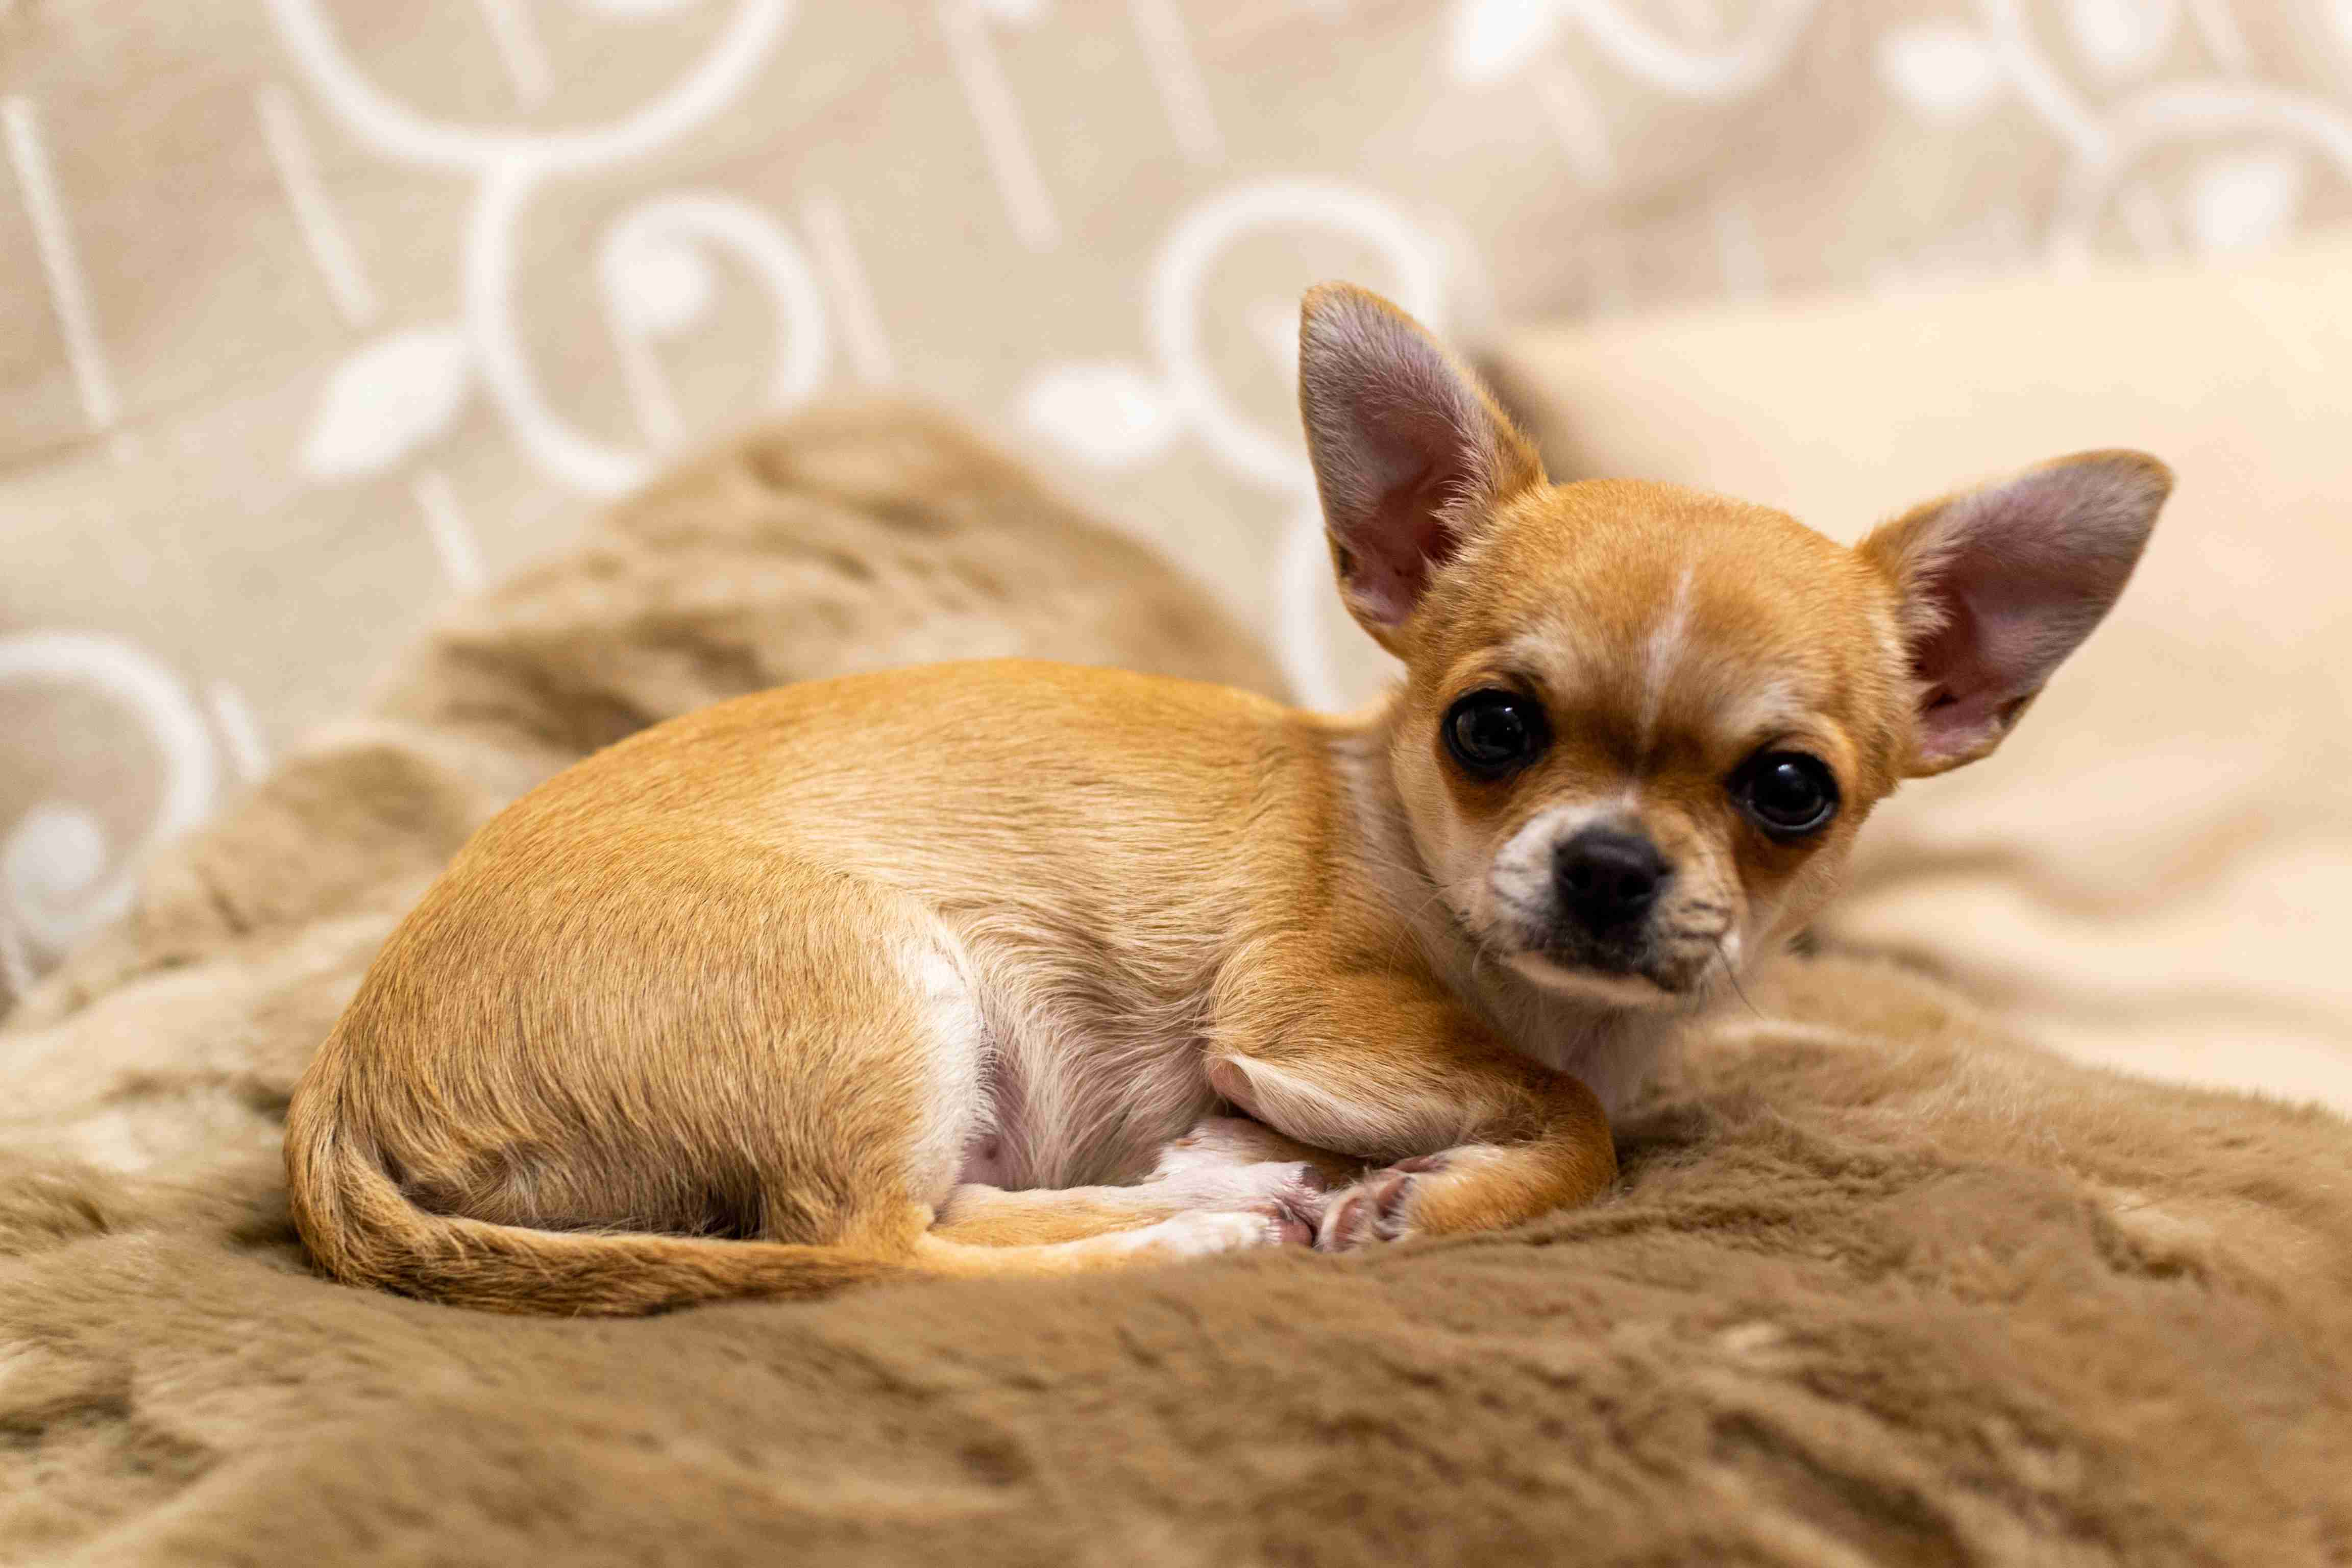 How can I prevent my Chihuahua from becoming territorial and aggressive over their home?